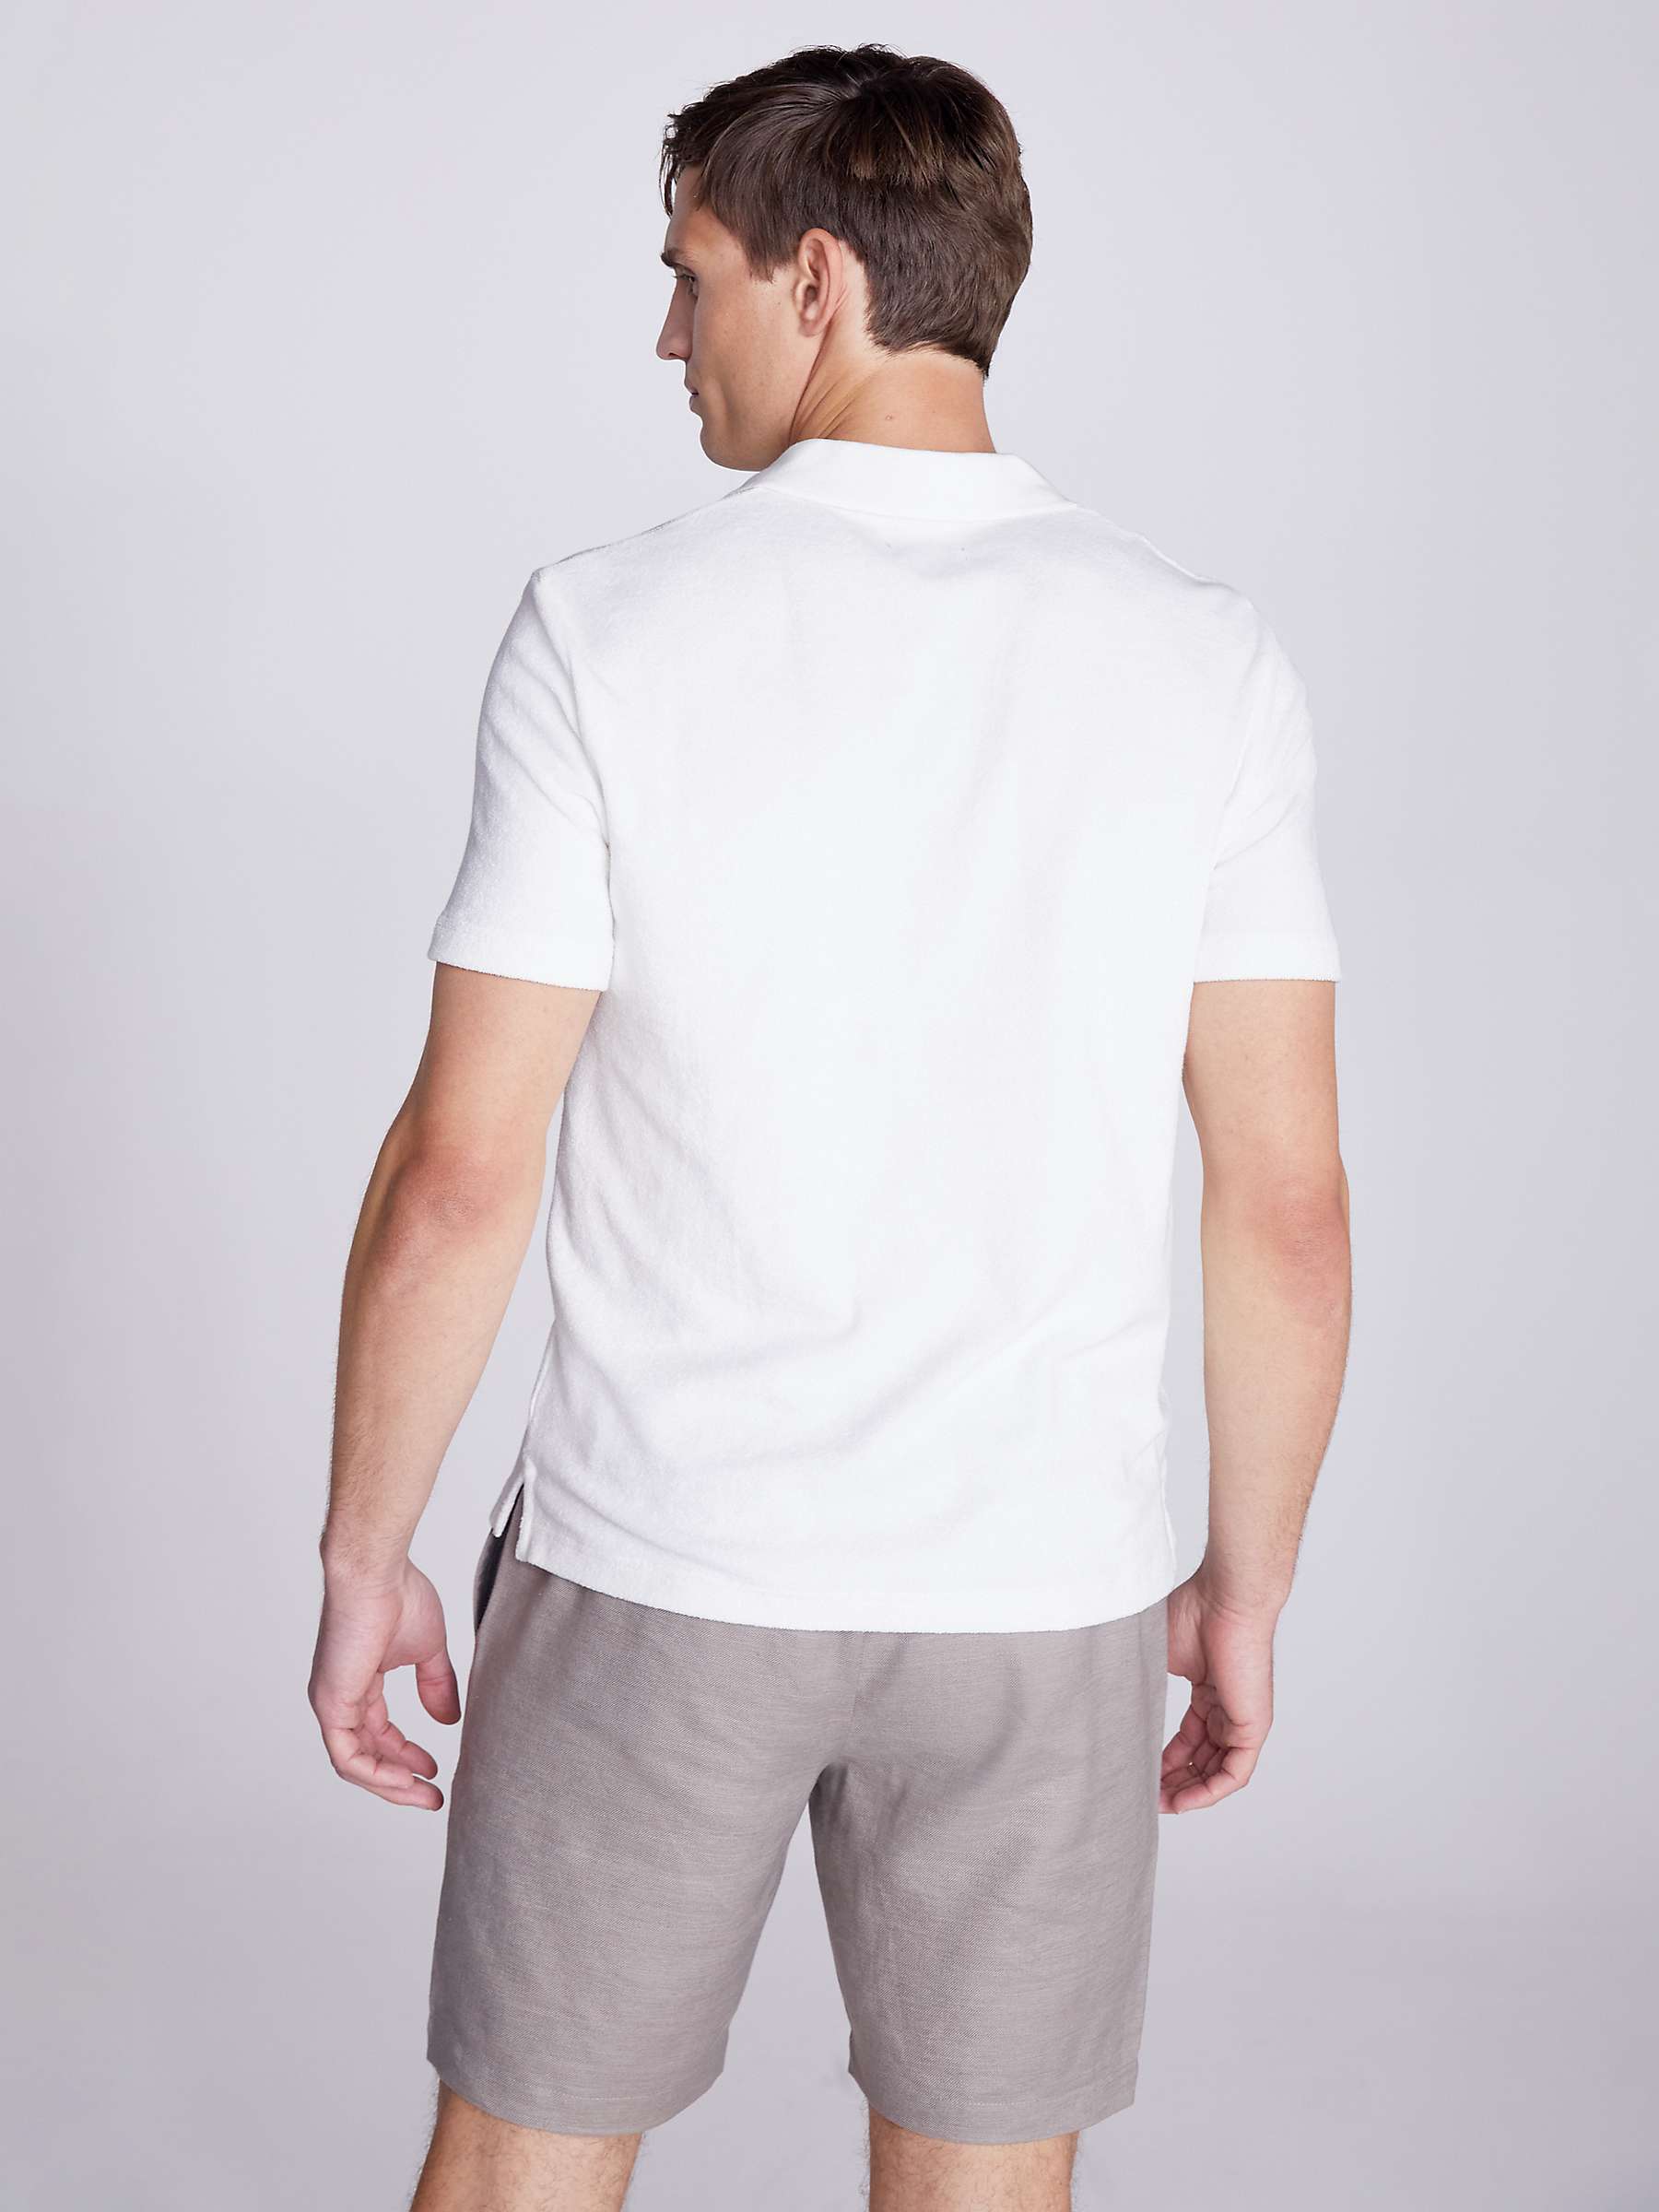 Buy Moss Terry Towelling Polo Shirt, Ecru Online at johnlewis.com